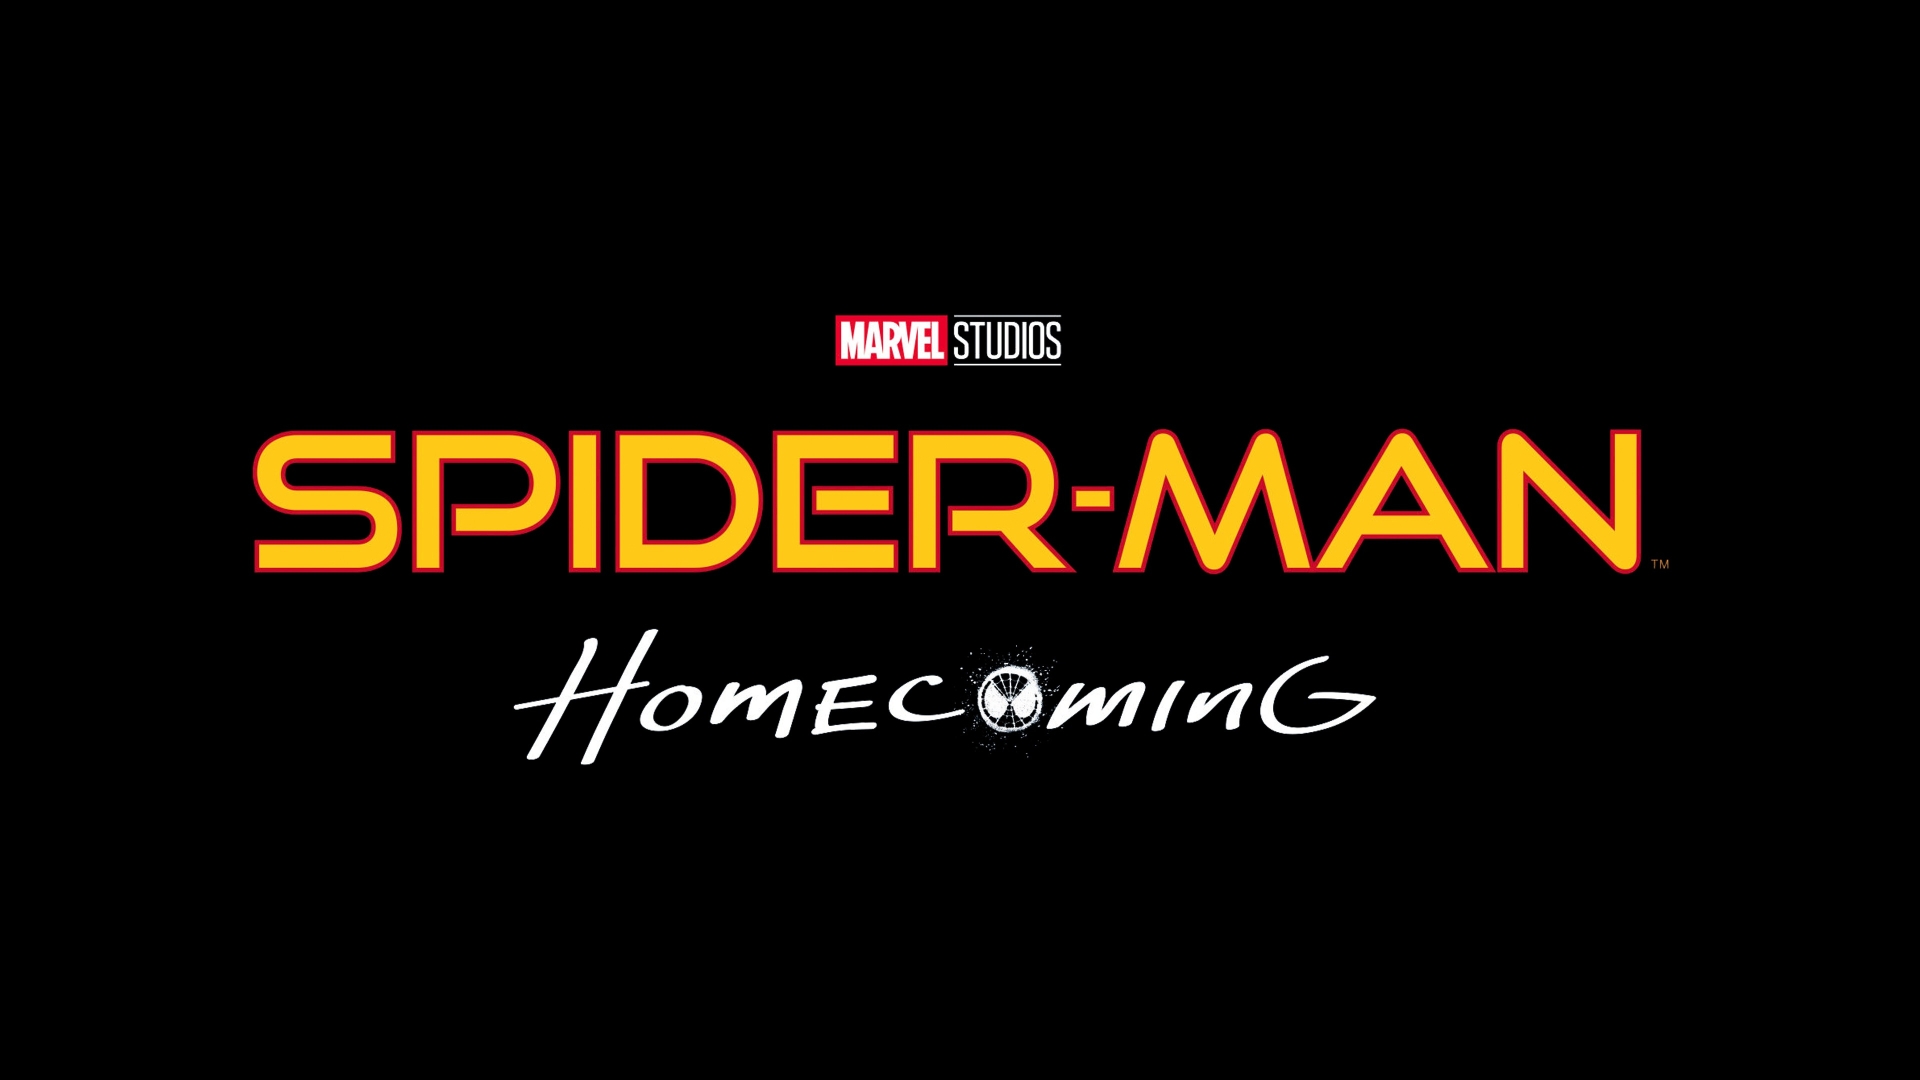 Spiderman Homecoming 2017 for 1920 x 1080 HDTV 1080p resolution